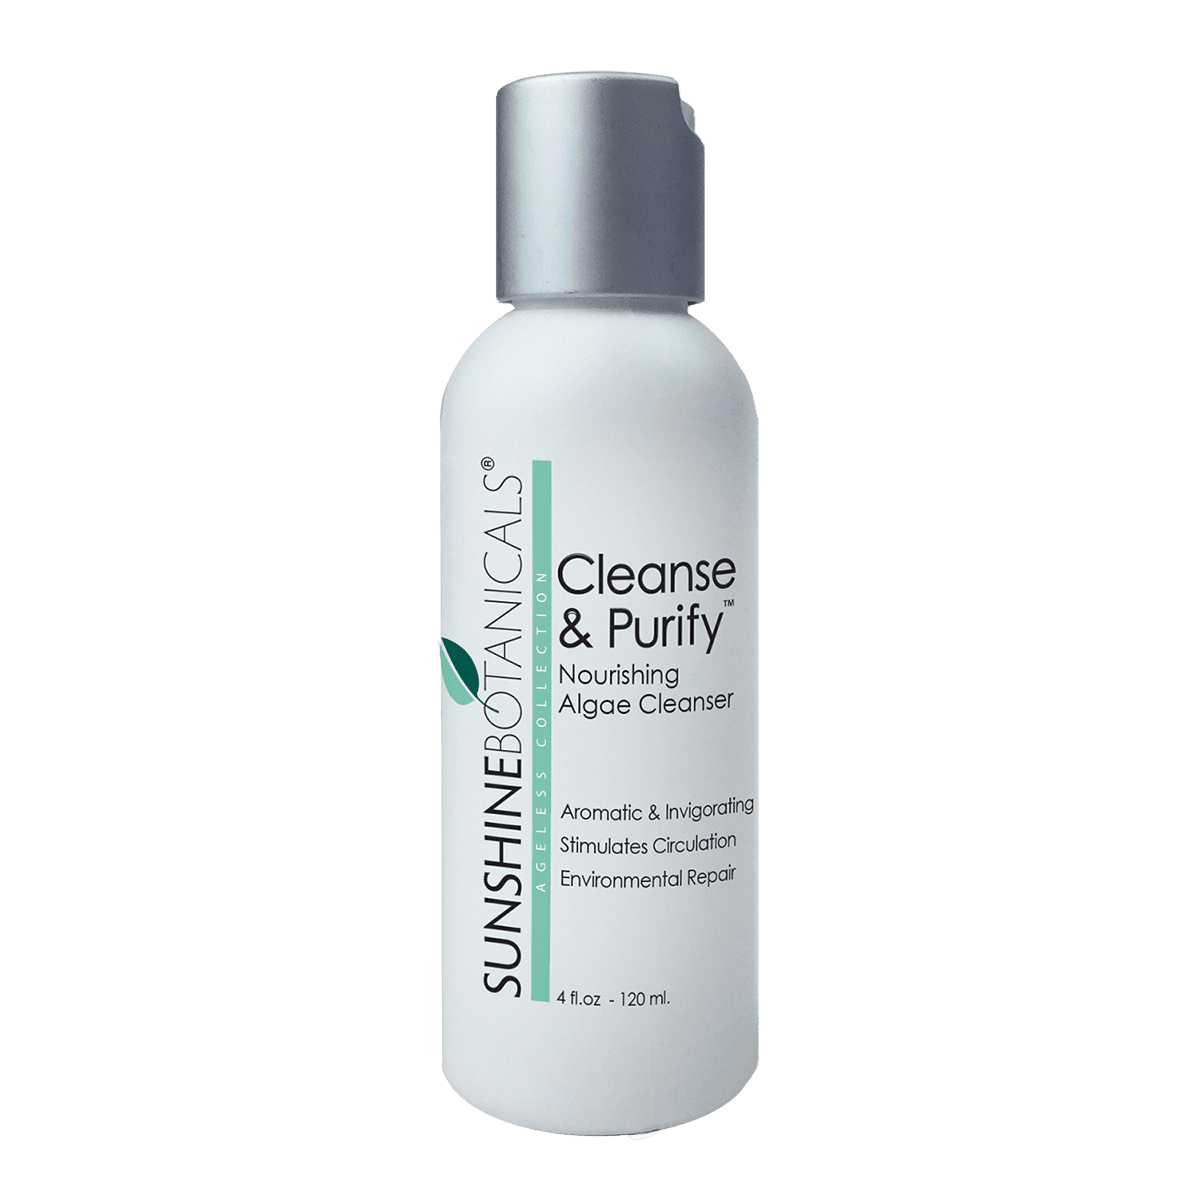 Cleanse & Purify by Sunshine Botanicals